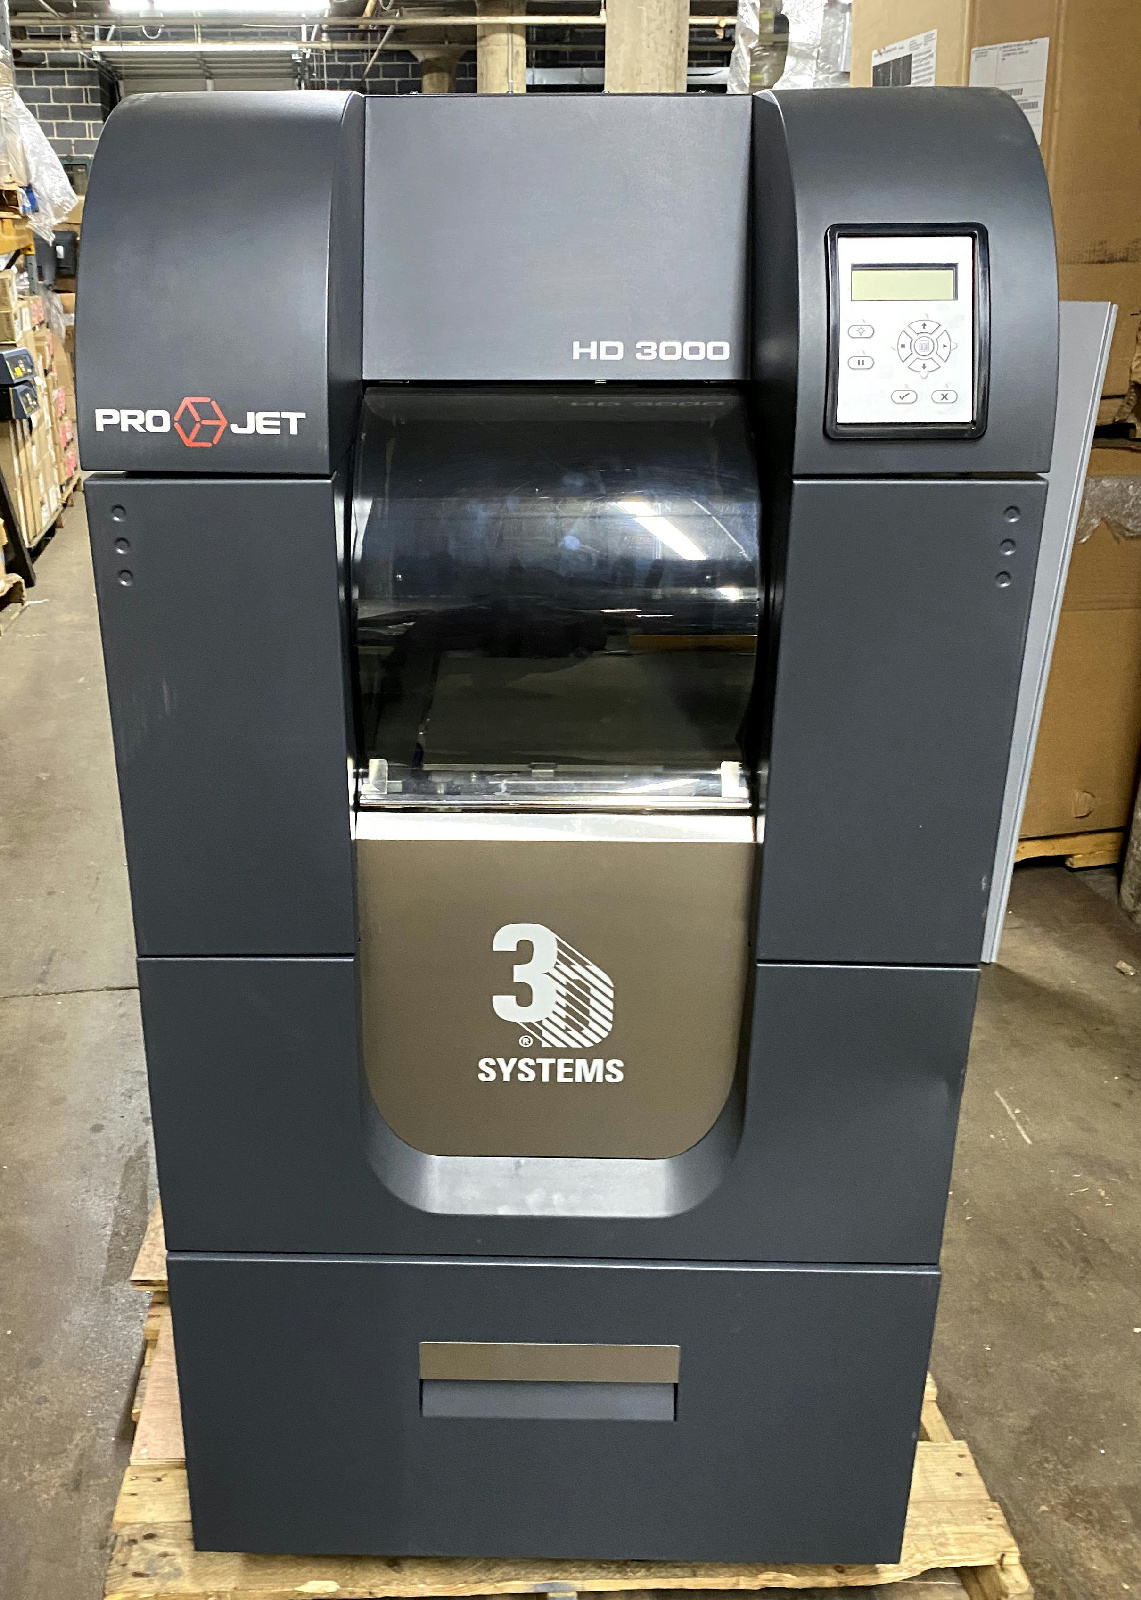 3D Systems ProJet HD 3000 Rapid Prototyping 3D Printer .